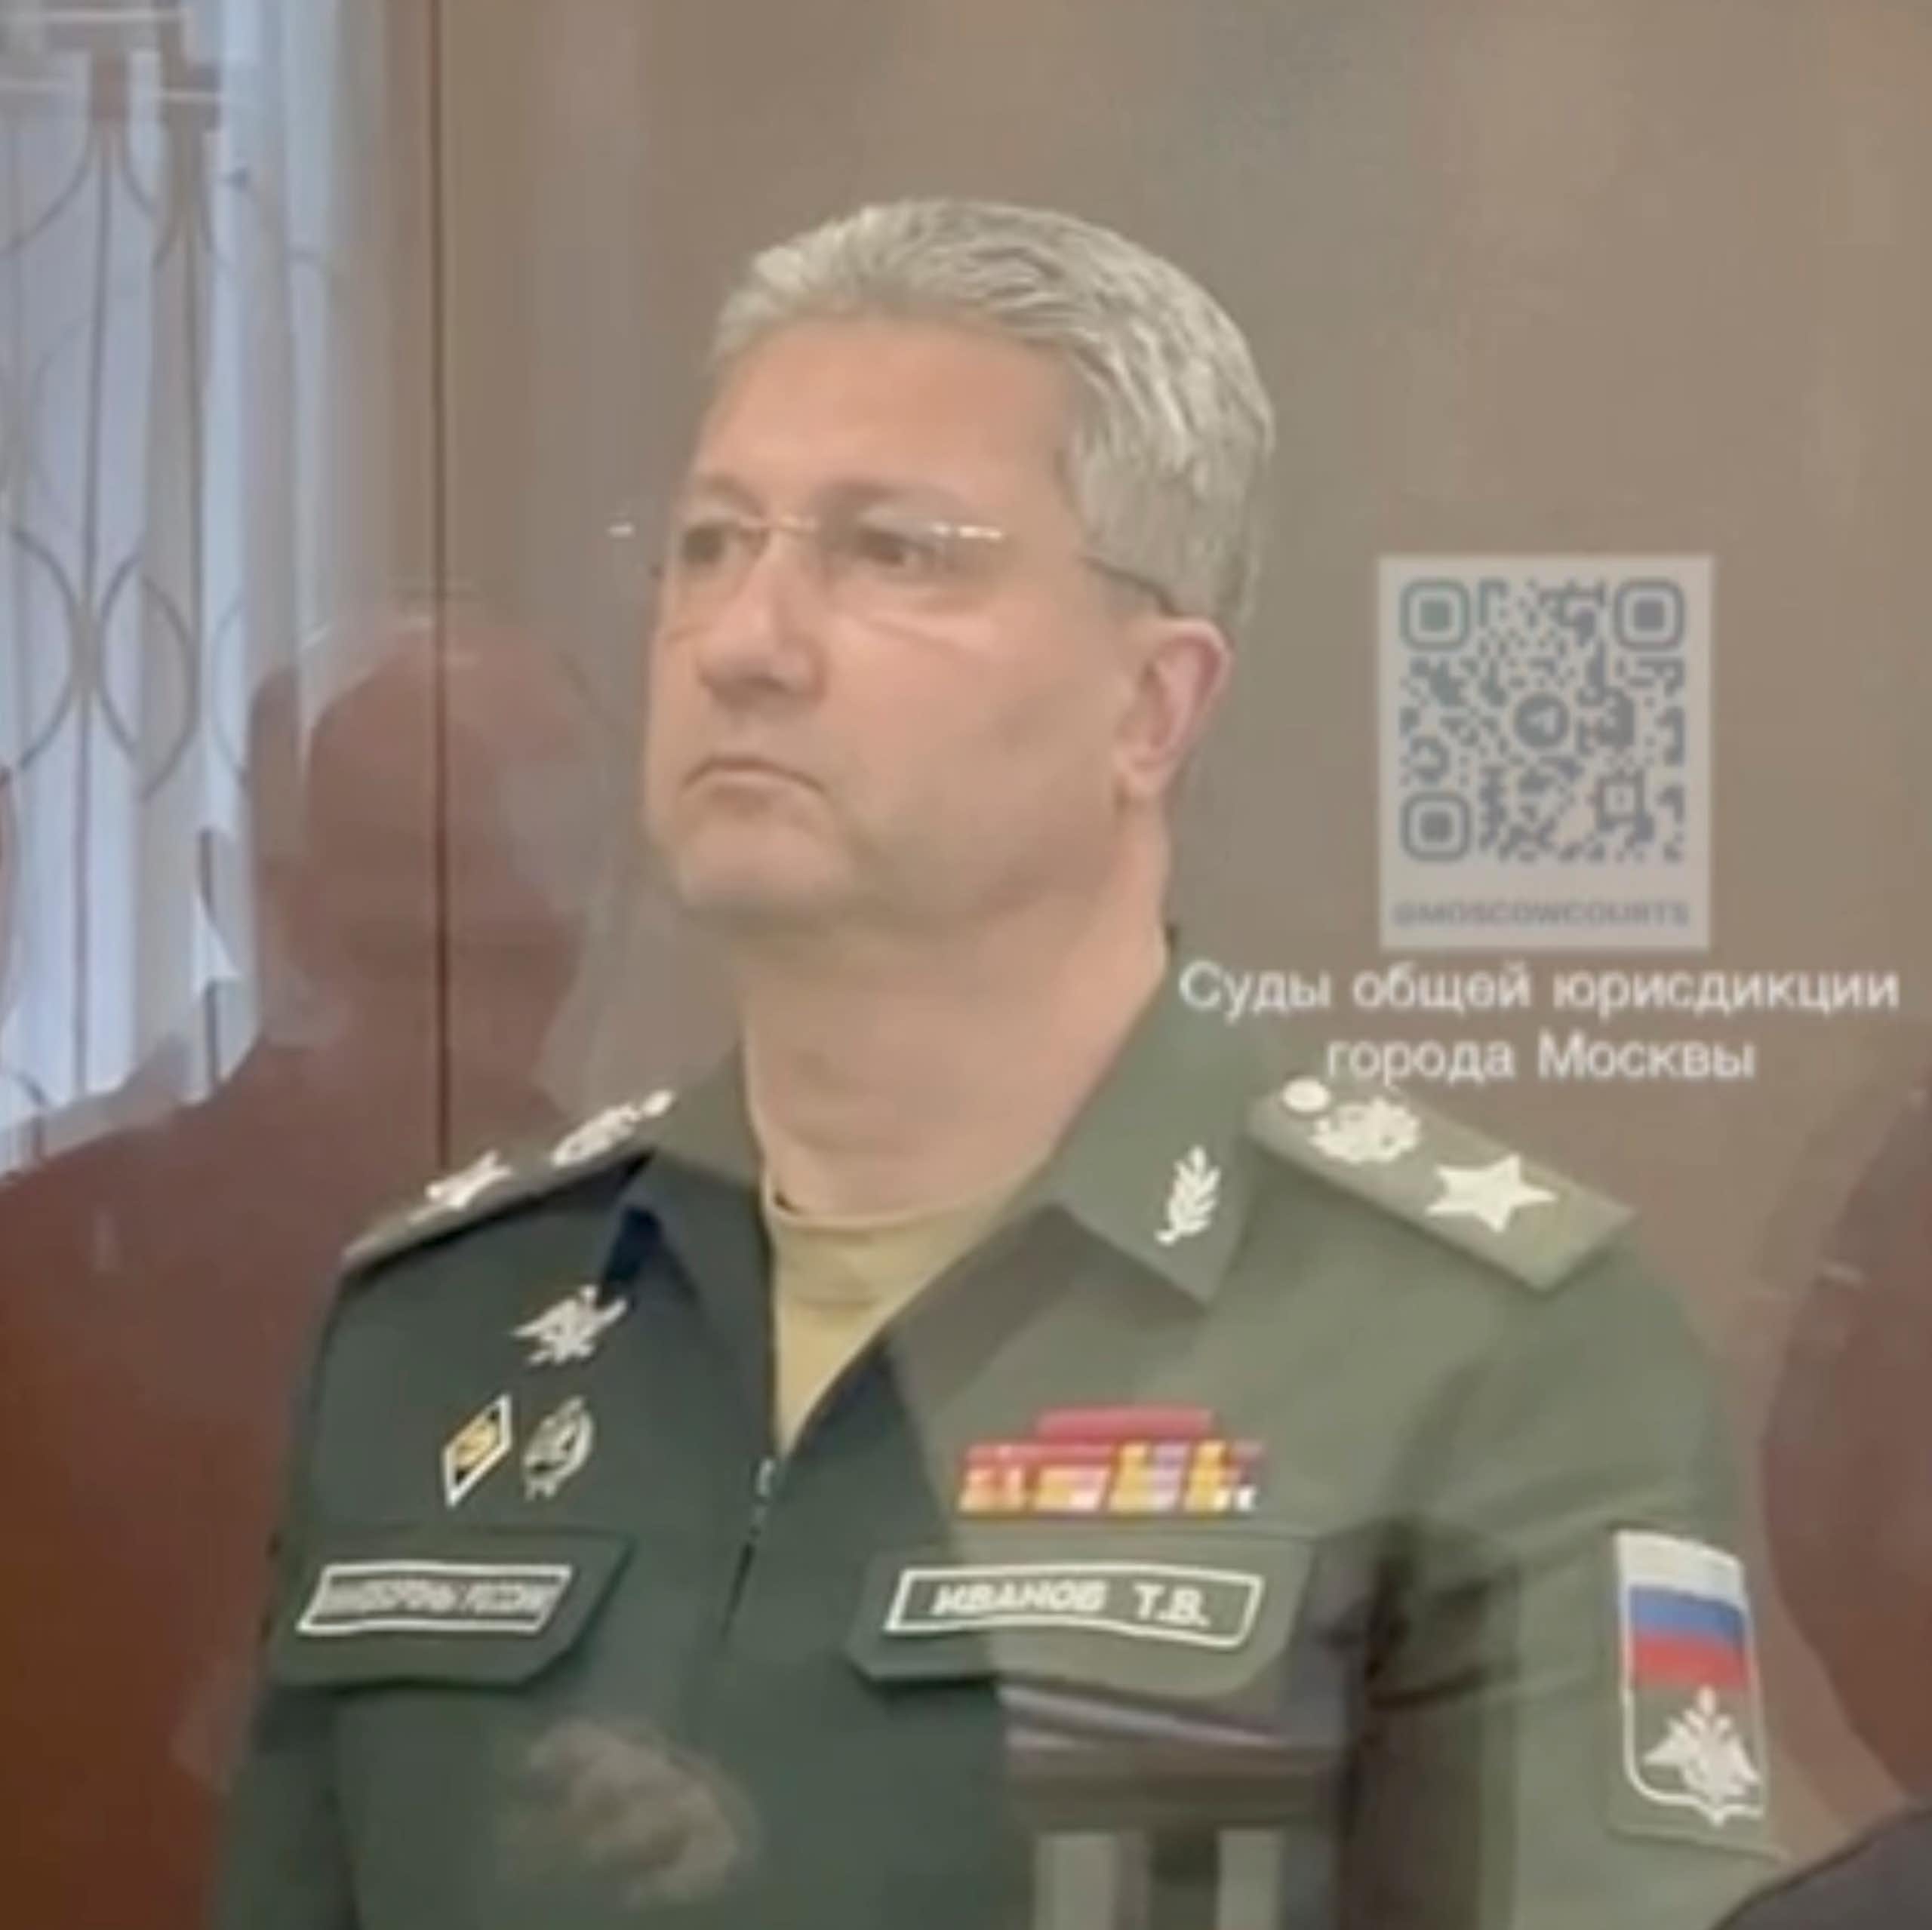 Russia's deputy defence minister, Timur Ivanov, faces court wearing his full military uniform